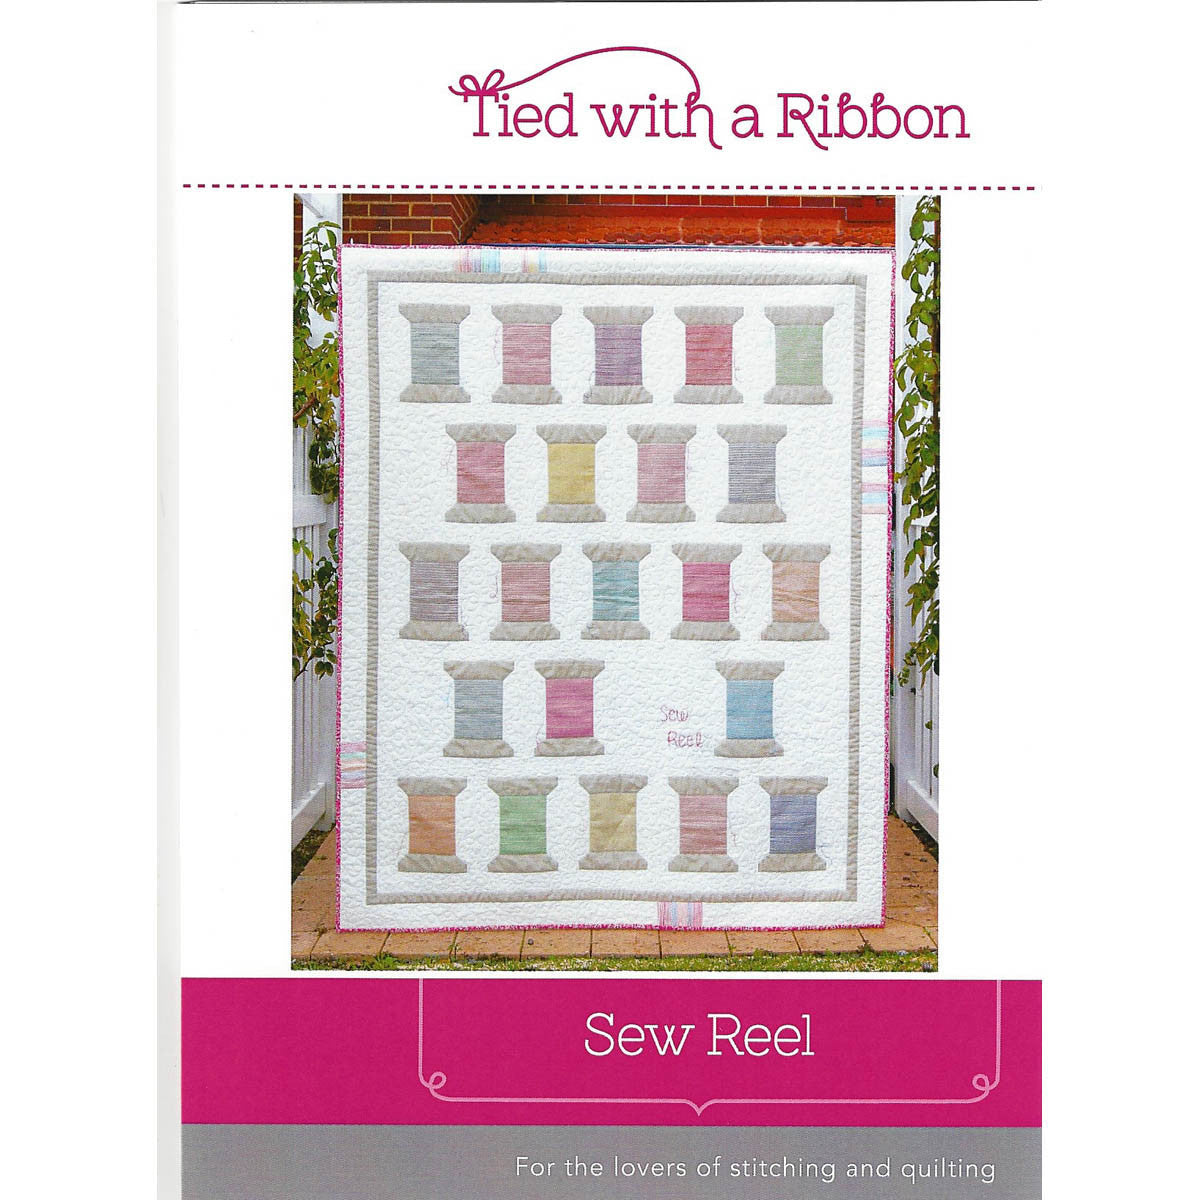 SEW REEL - Quilt Pattern - by Australian Designer Jemima Flendt - brand: Tied With A Ribbon